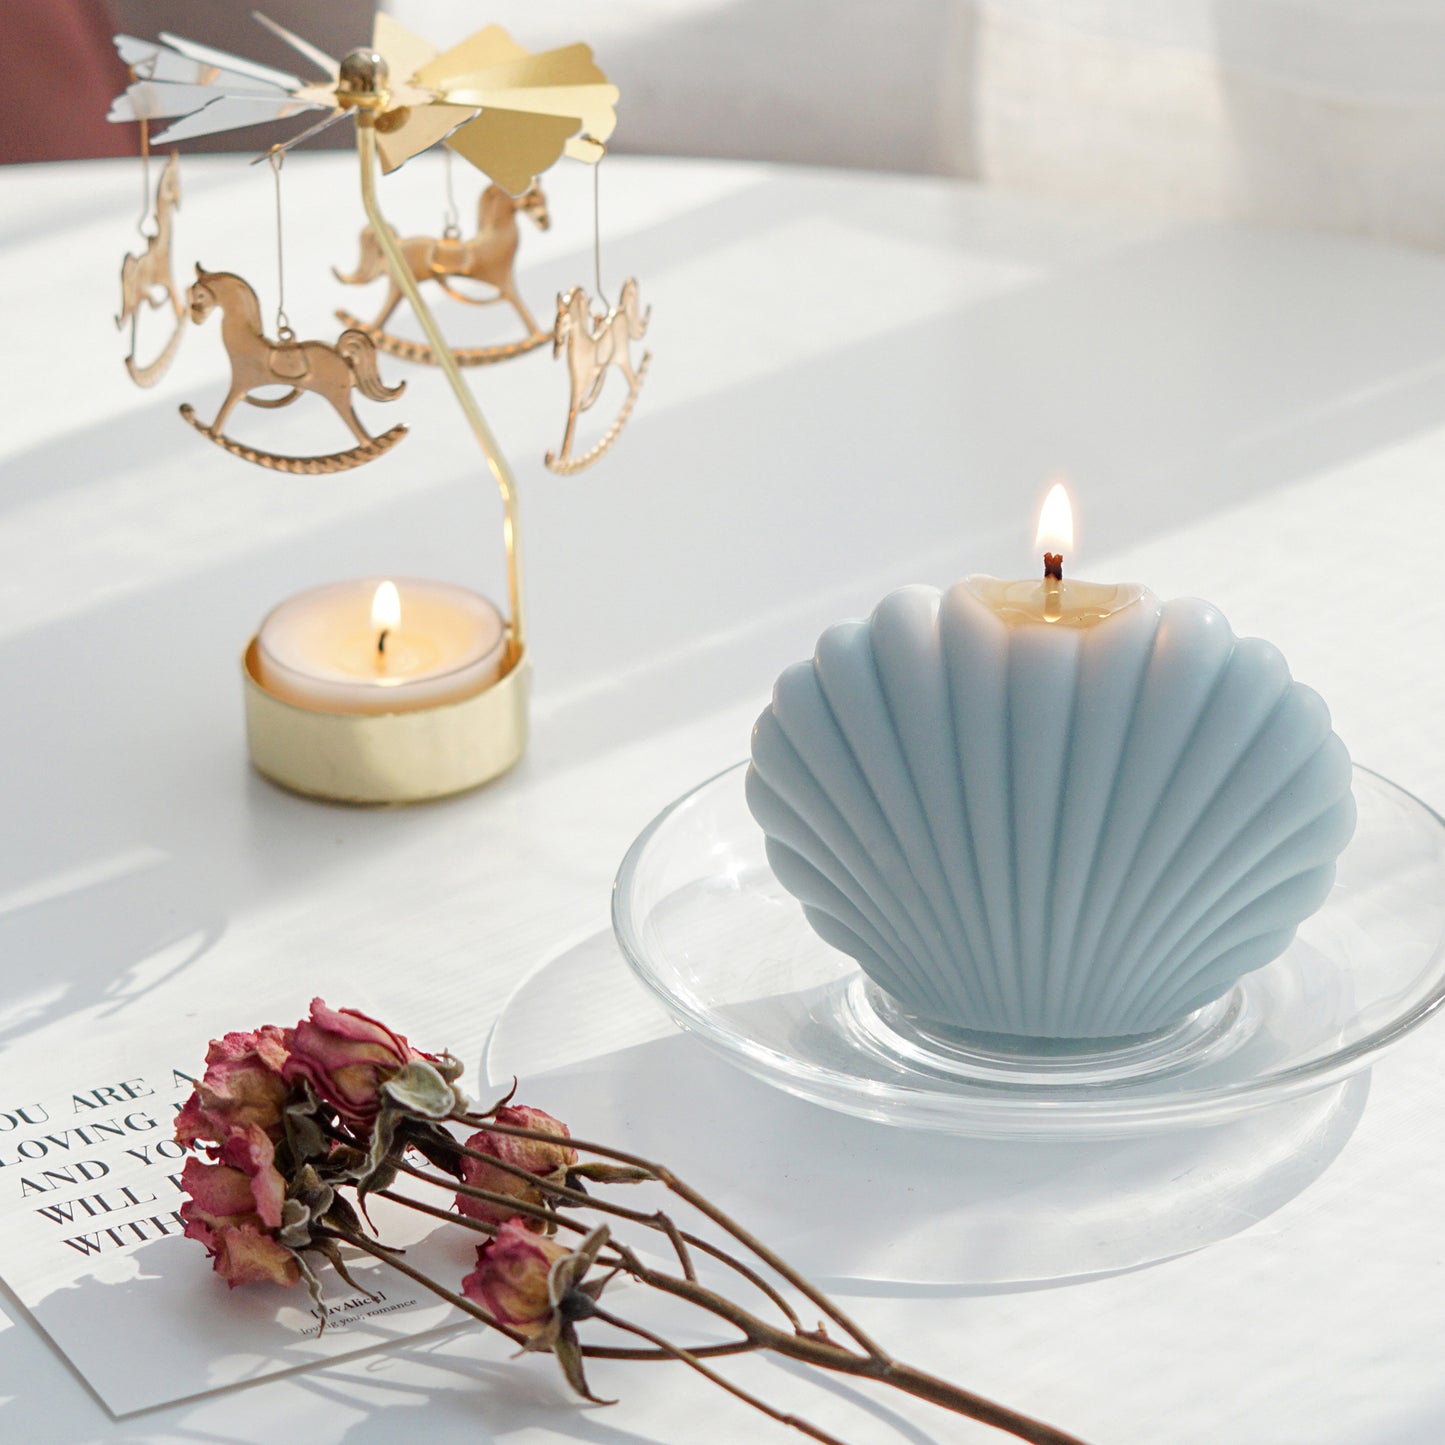 a lit aqua blue seashell shape soy pillar candle on a clear dish, pink dried roses, a postcard, and a lit tealight candle in a gold merry-go-round tealight candle holder on white round table